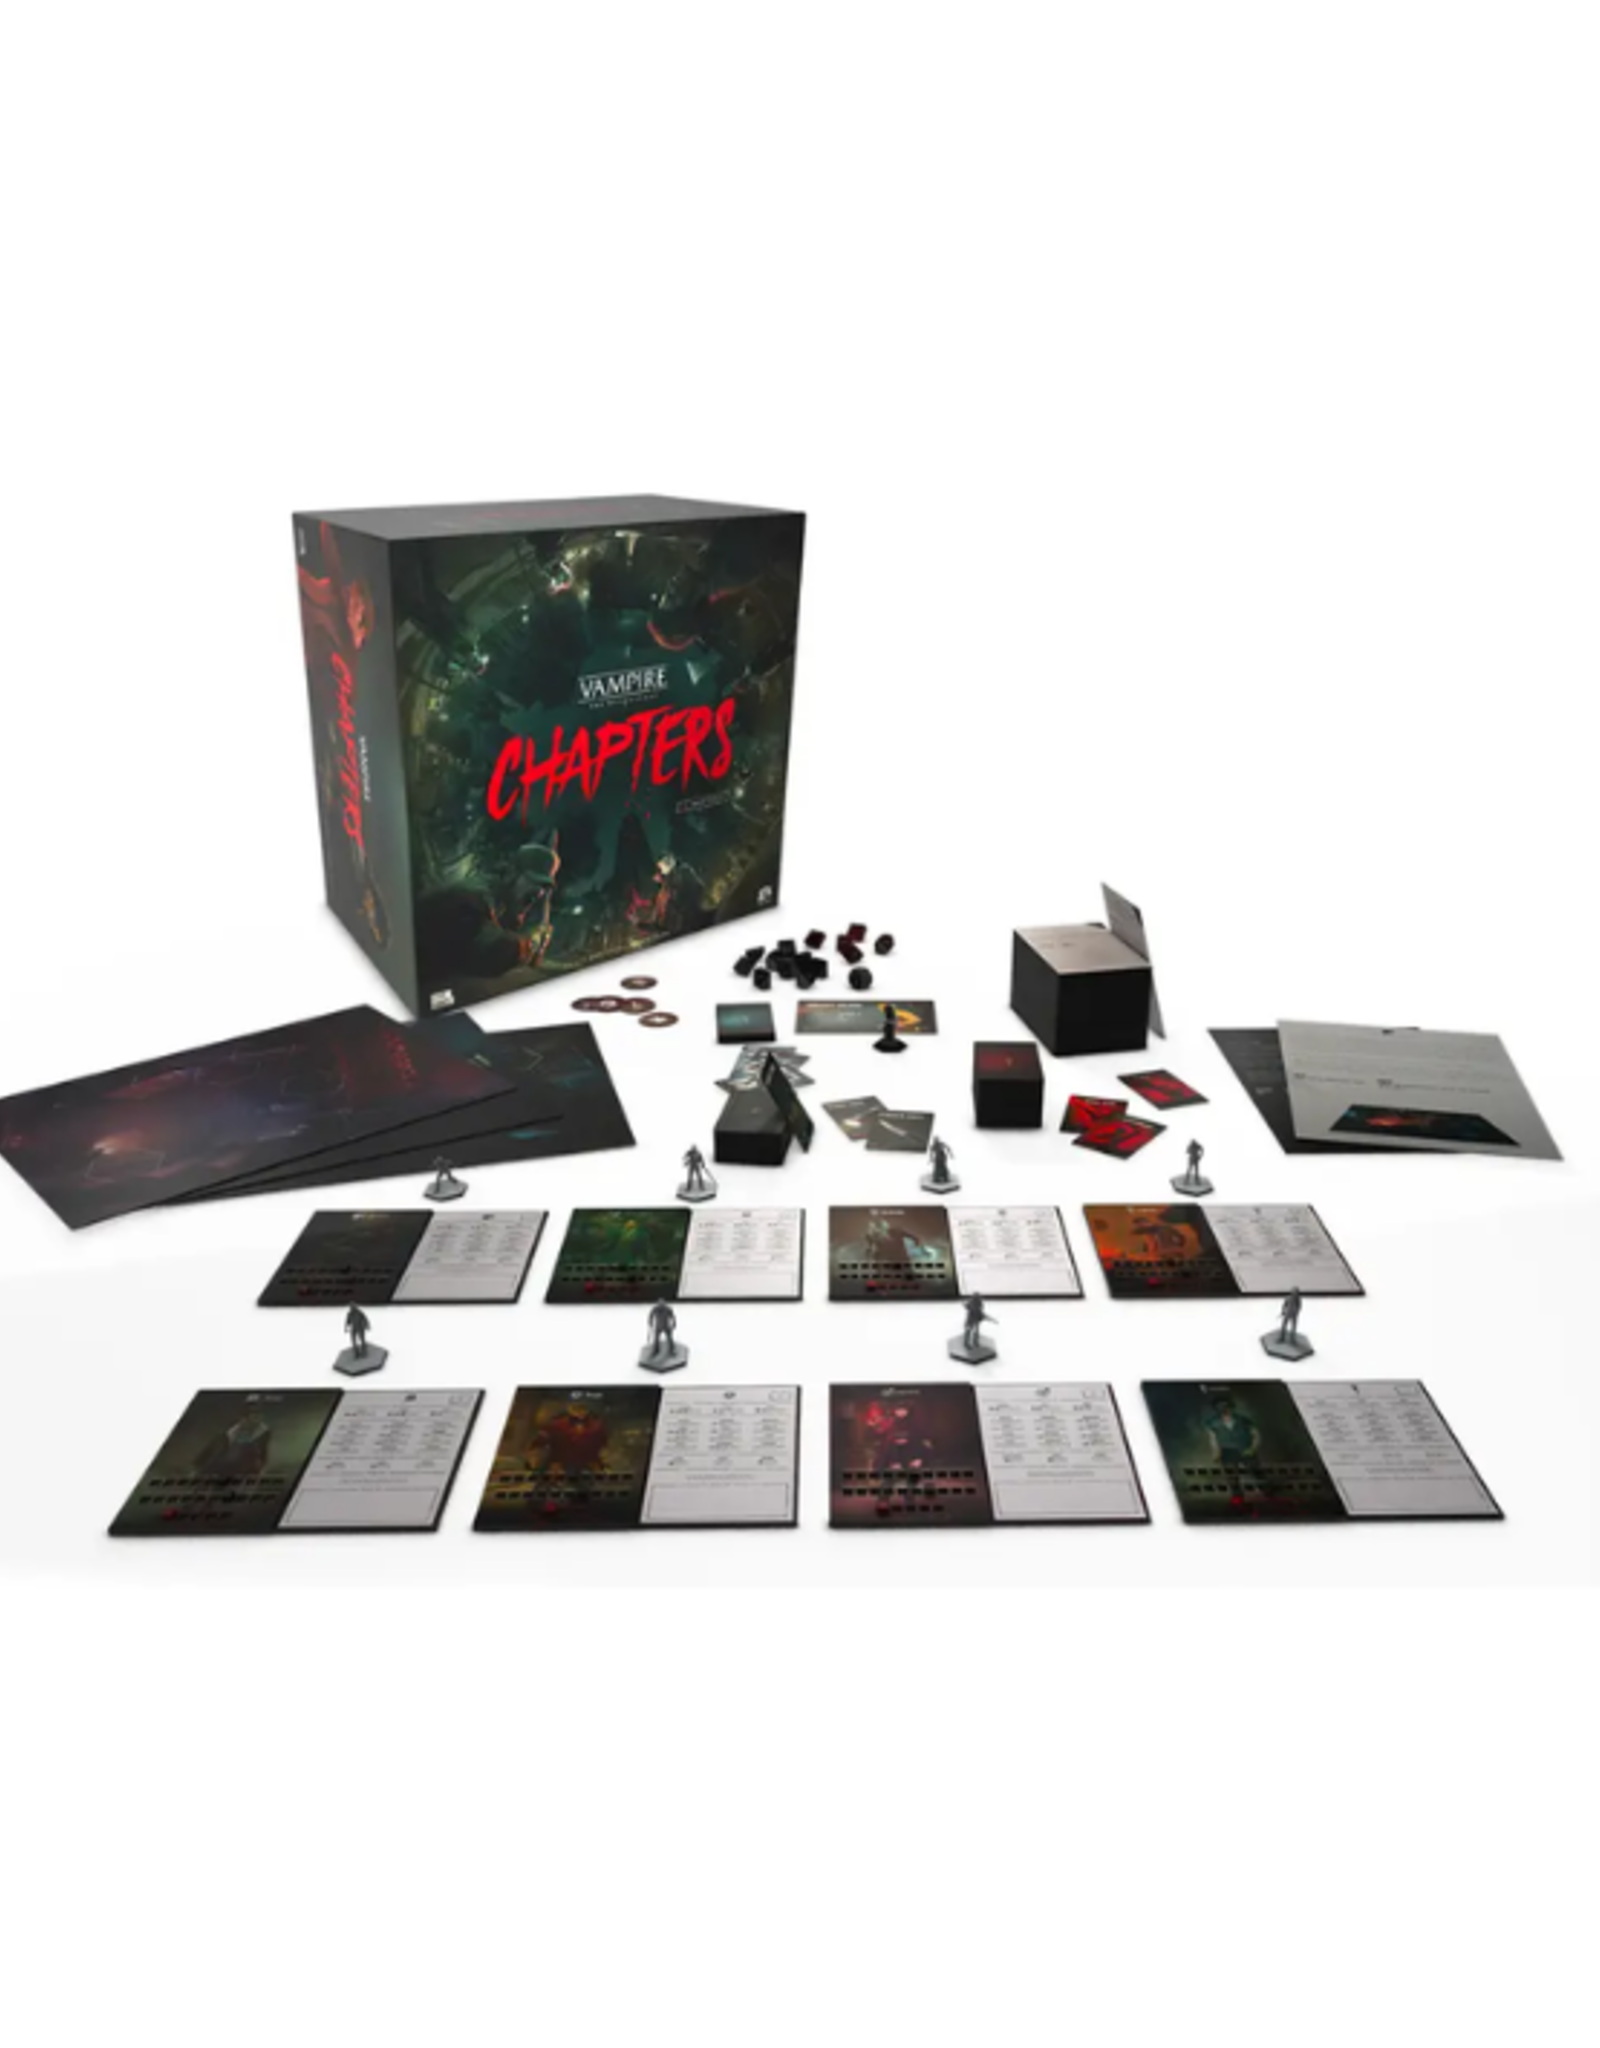  Vampire: The Masquerade - Chapters: Montreal - A Cooperative  Story-Driven Table top Game - for Adults - Ages 18+ - 1 to 4 Players - 30  Minutes per Player - Made by Flyos Games : Toys & Games